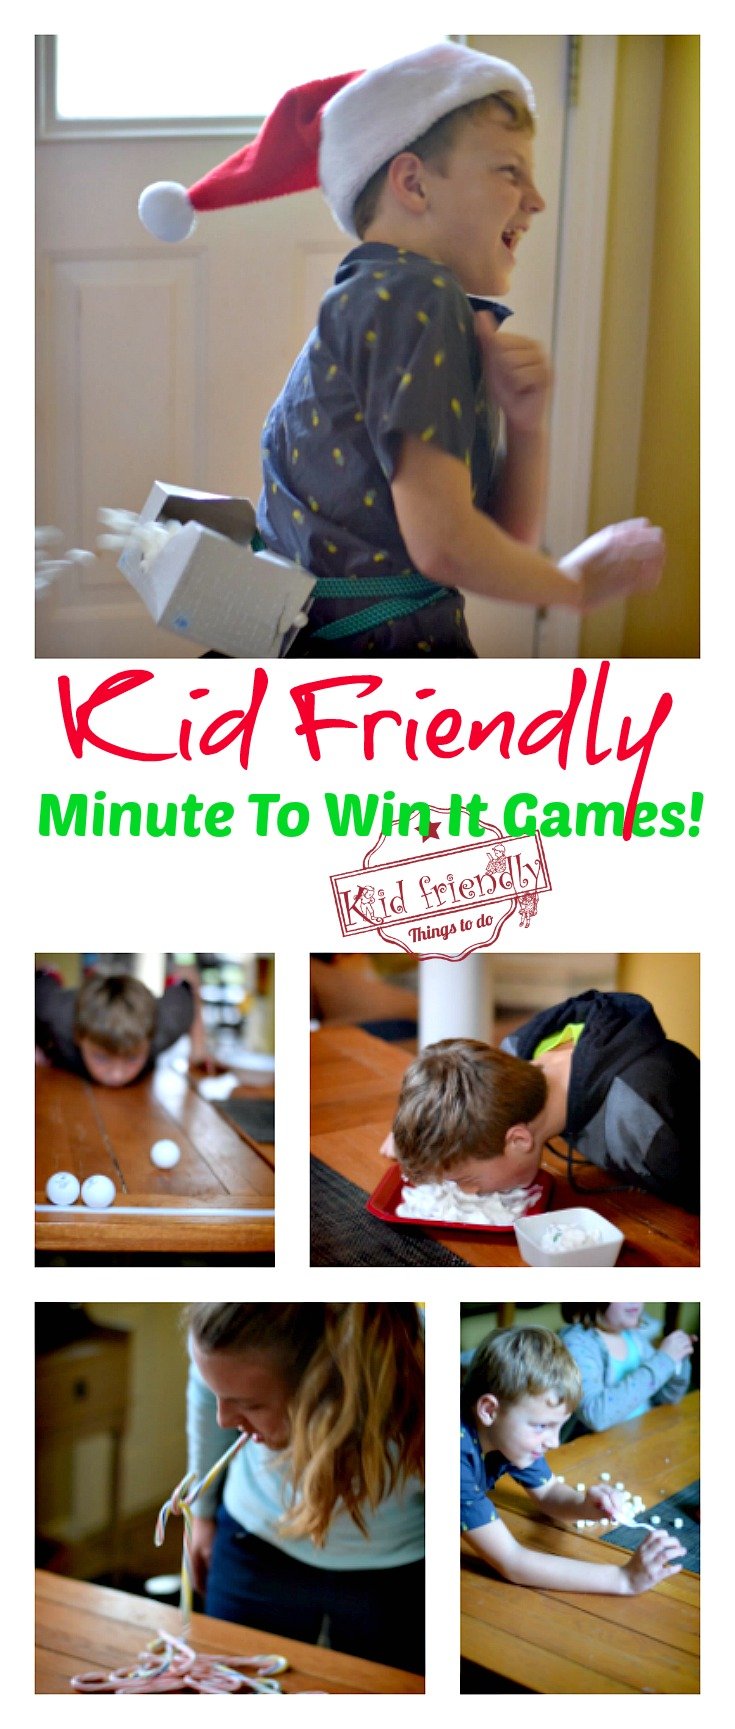 Win minute it games to 25 Easy